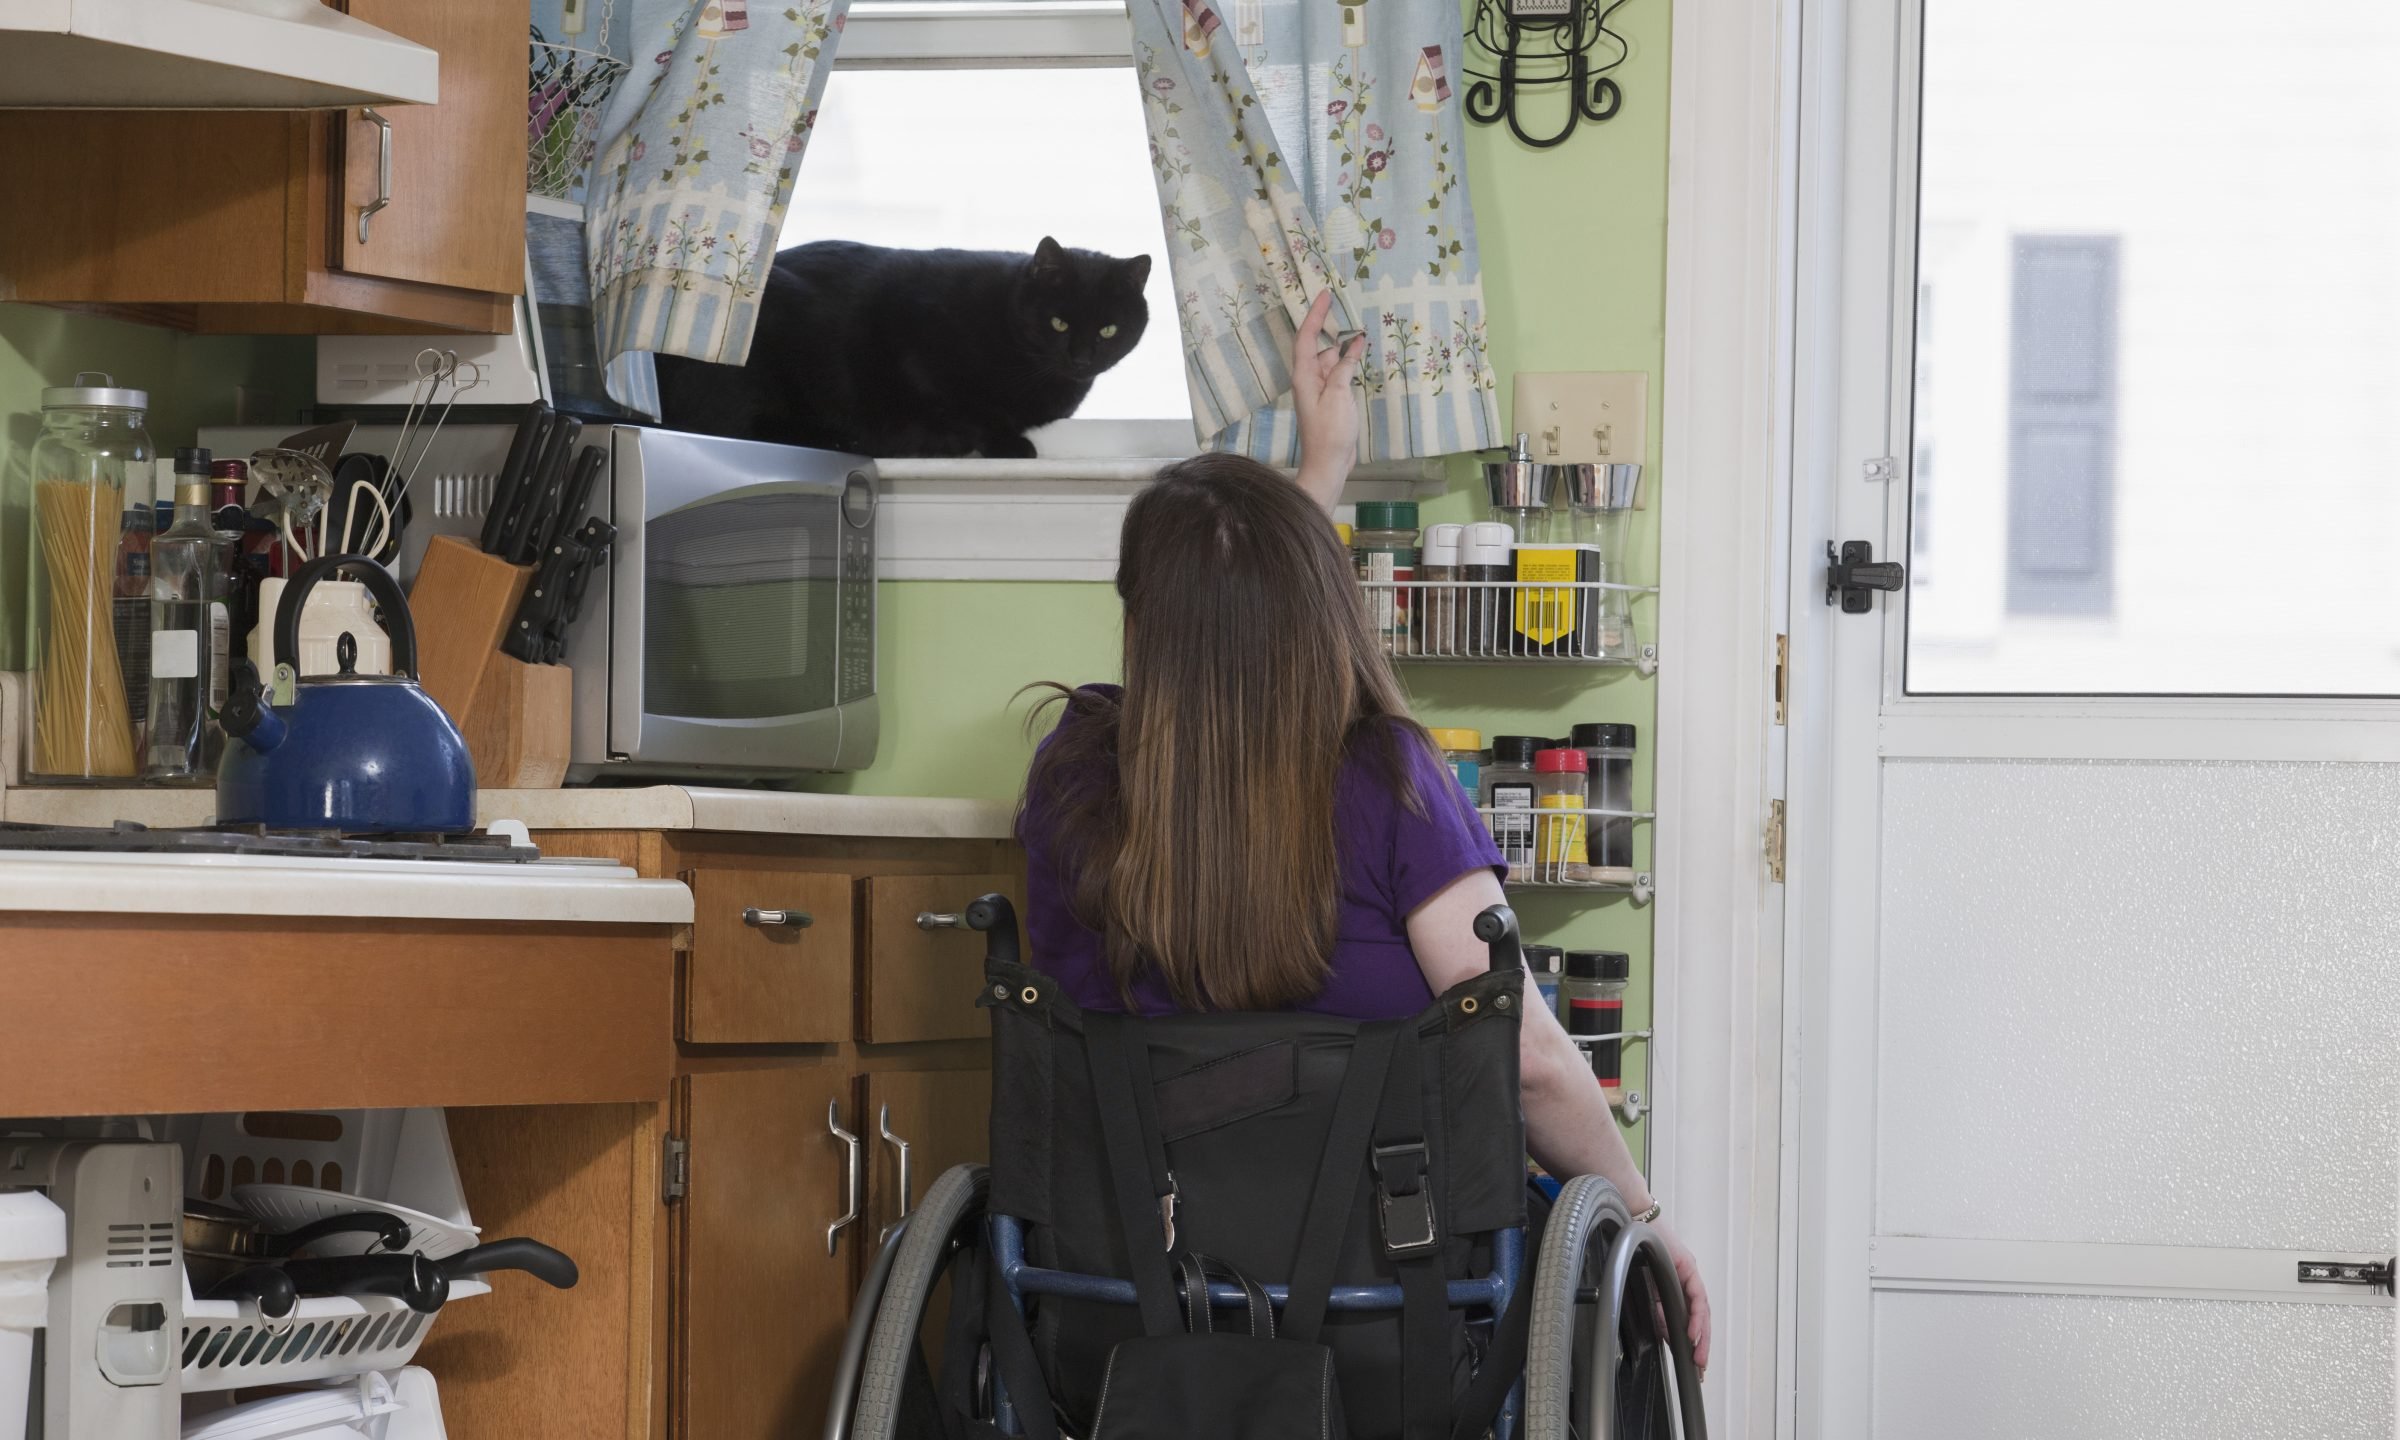 The Ultimate Guide to Home Modifications for Persons with Disabilities